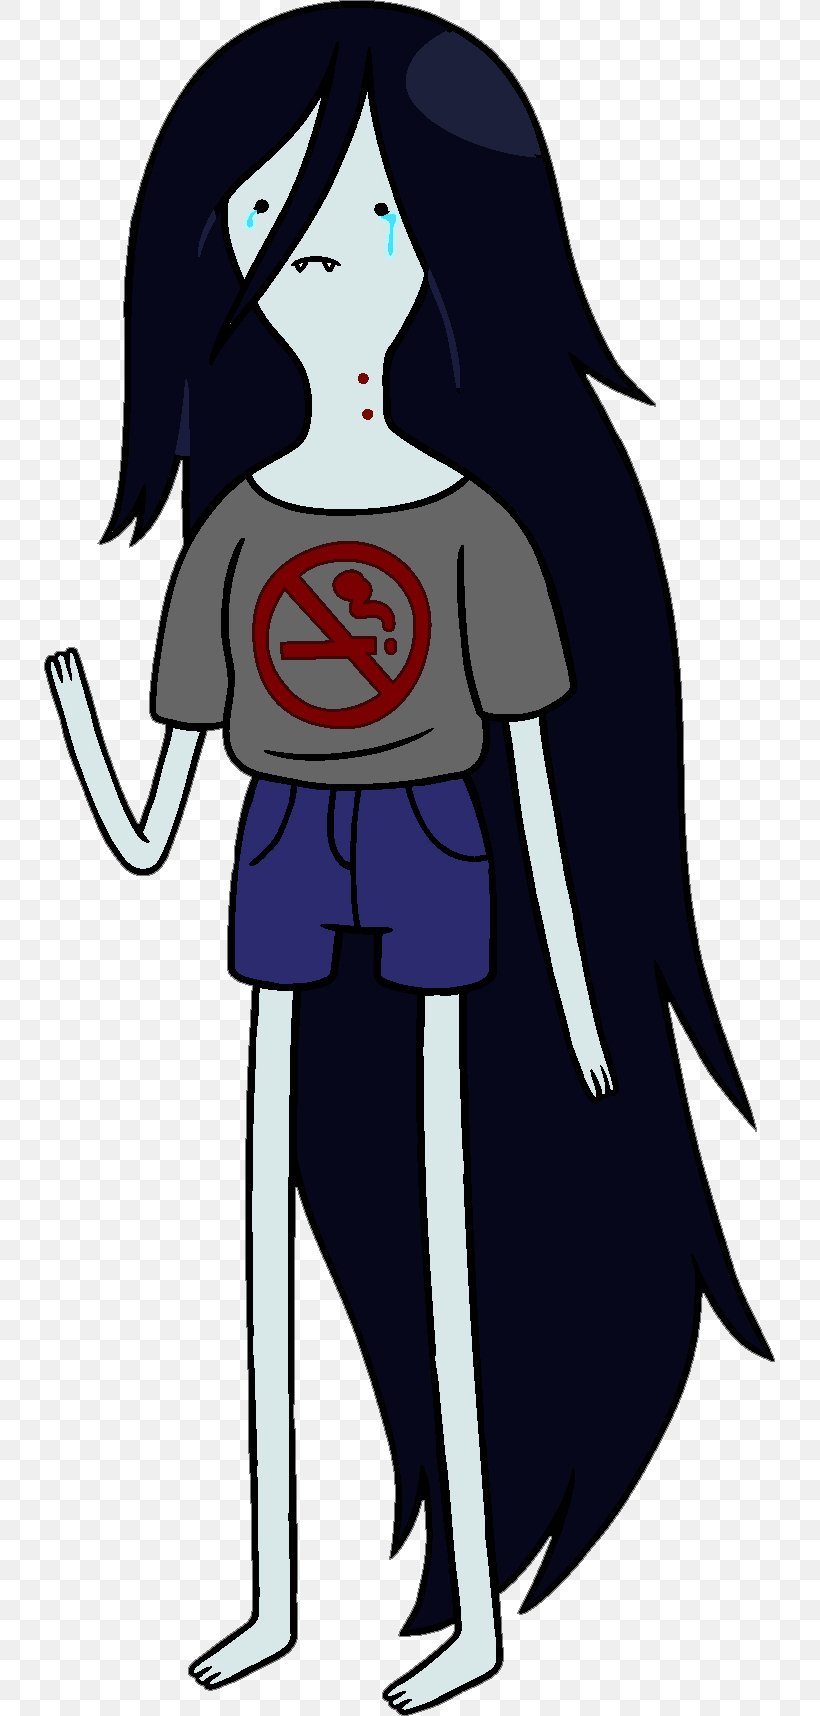 Marceline The Vampire Queen Ice King Finn The Human Princess Bubblegum Fashion, PNG, 731x1716px, Marceline The Vampire Queen, Adventure Time, Art, Cartoon Network, Character Download Free